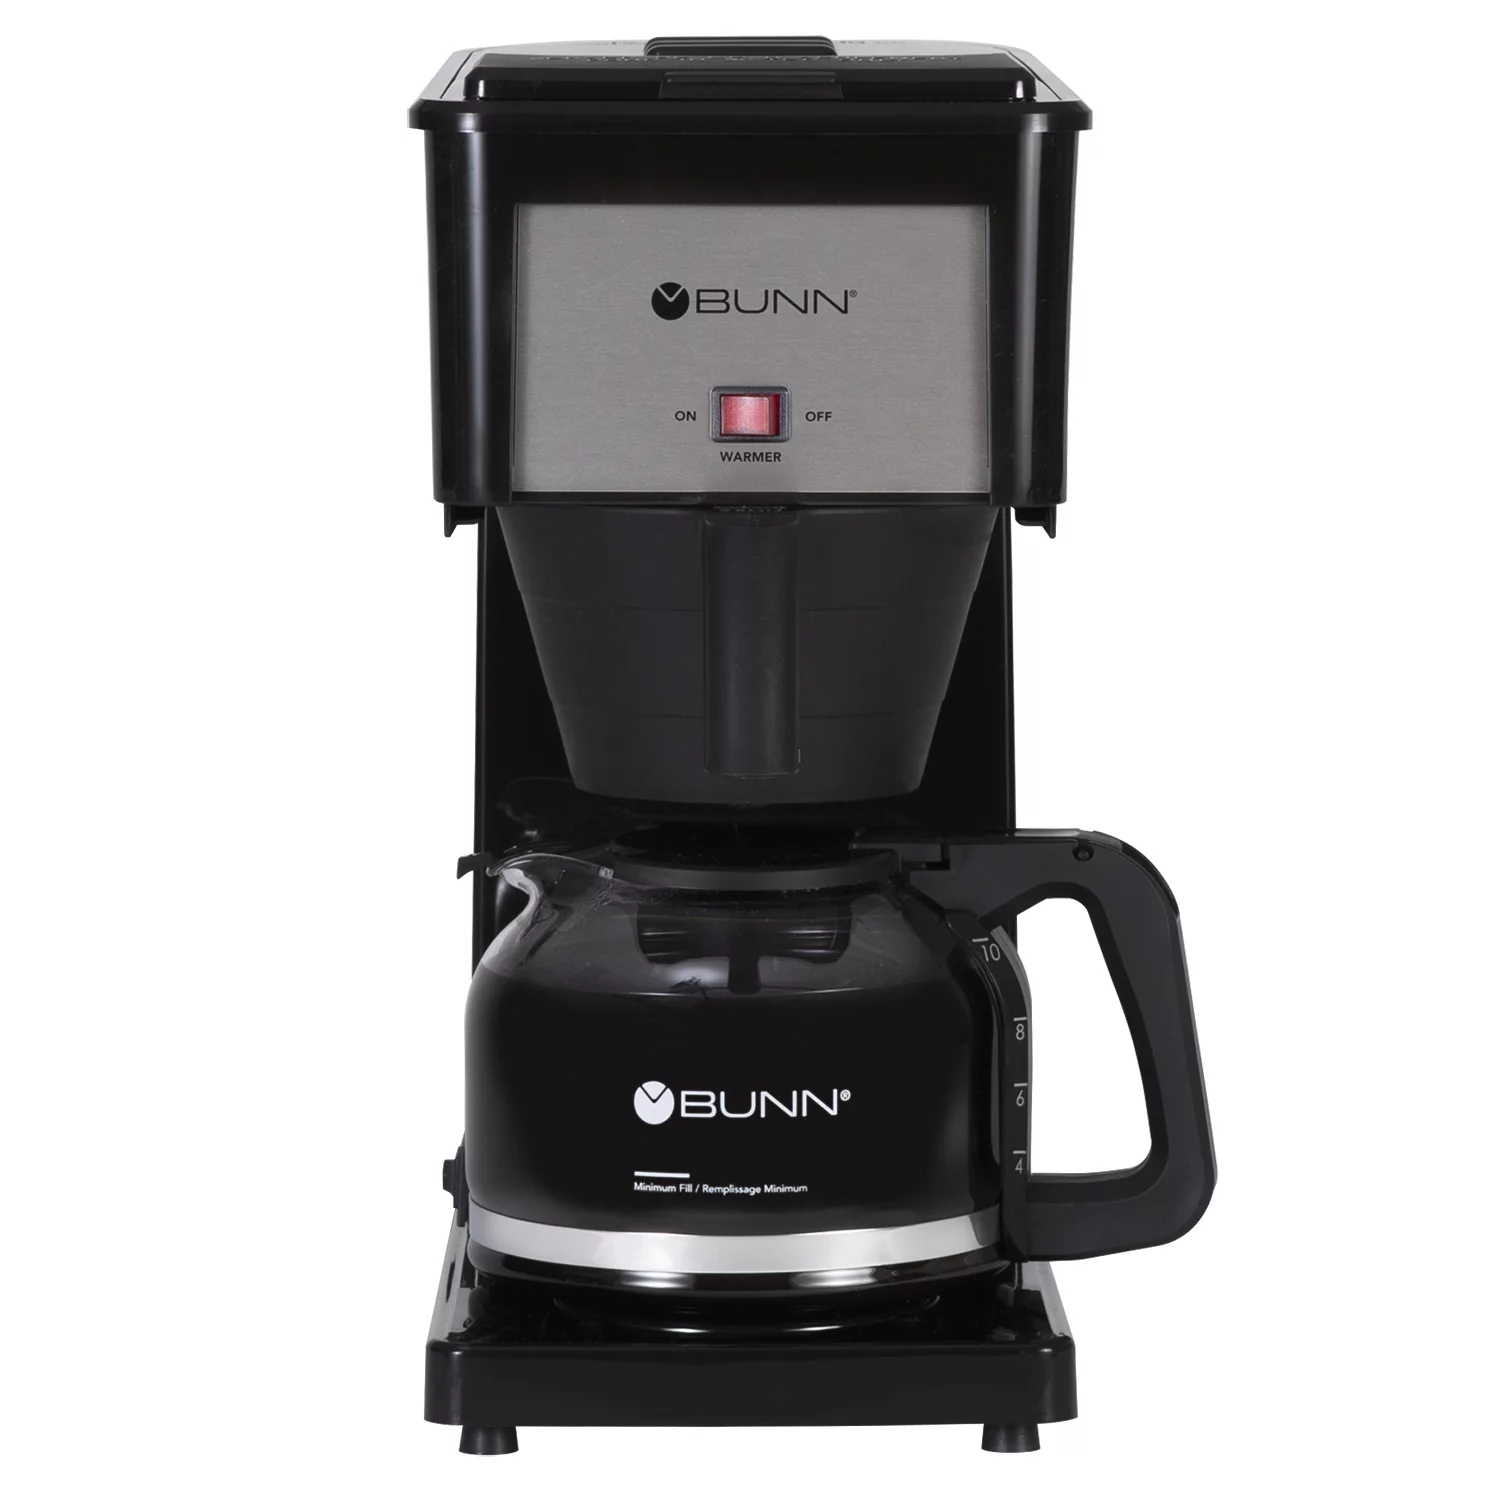 BUNN GRB Speed Brew Classic 10 Cup Coffee Maker, Black (Condition: New)